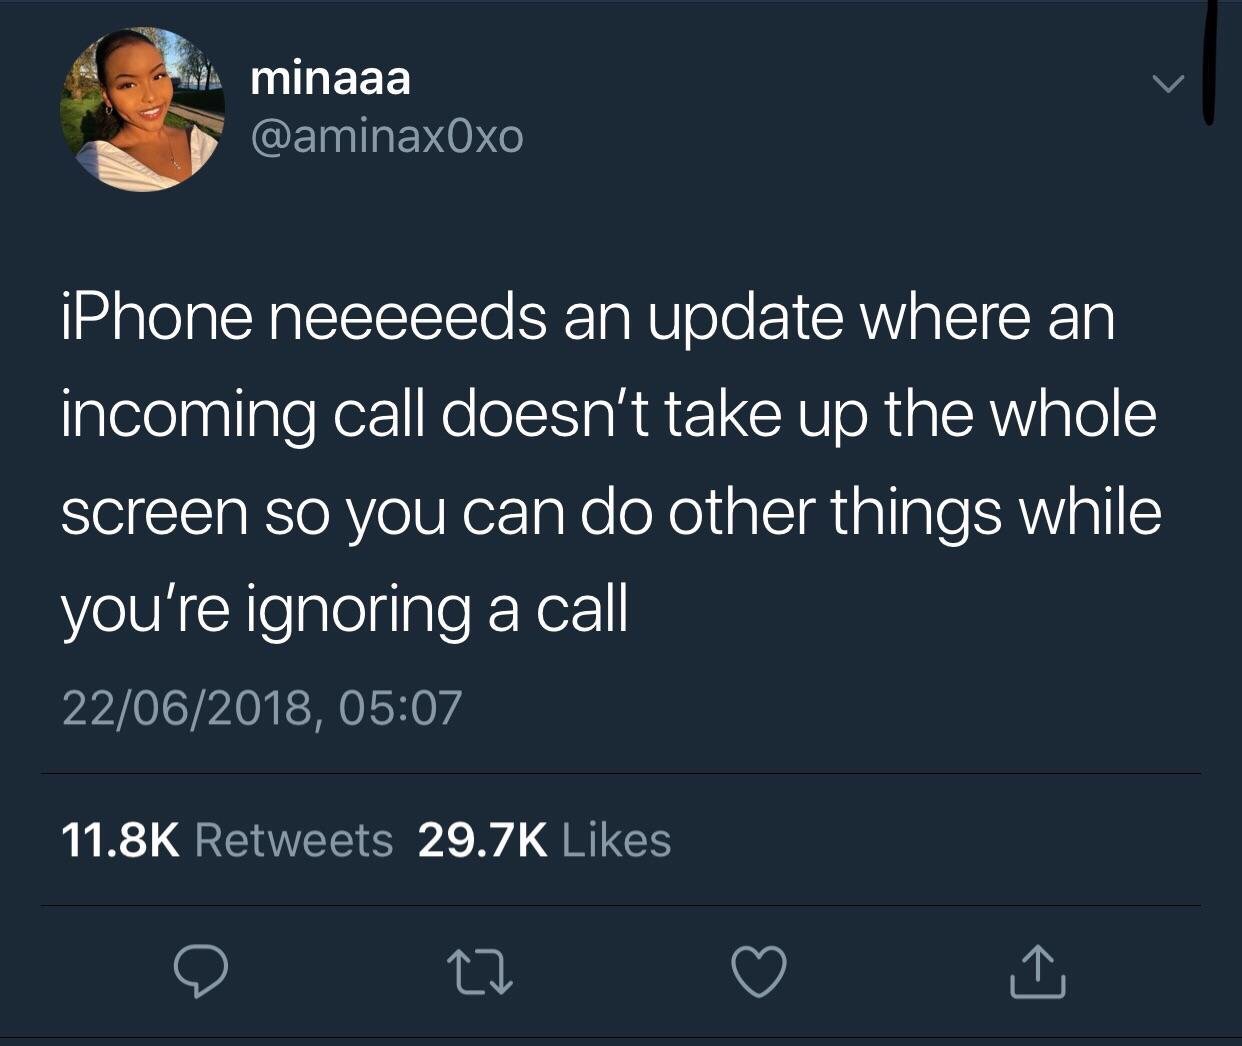 kunal kamra tweets - minaaa iPhone neeeeeds an update where an incoming call doesn't take up the whole screen so you can do other things while you're ignoring a call 22062018, le 22